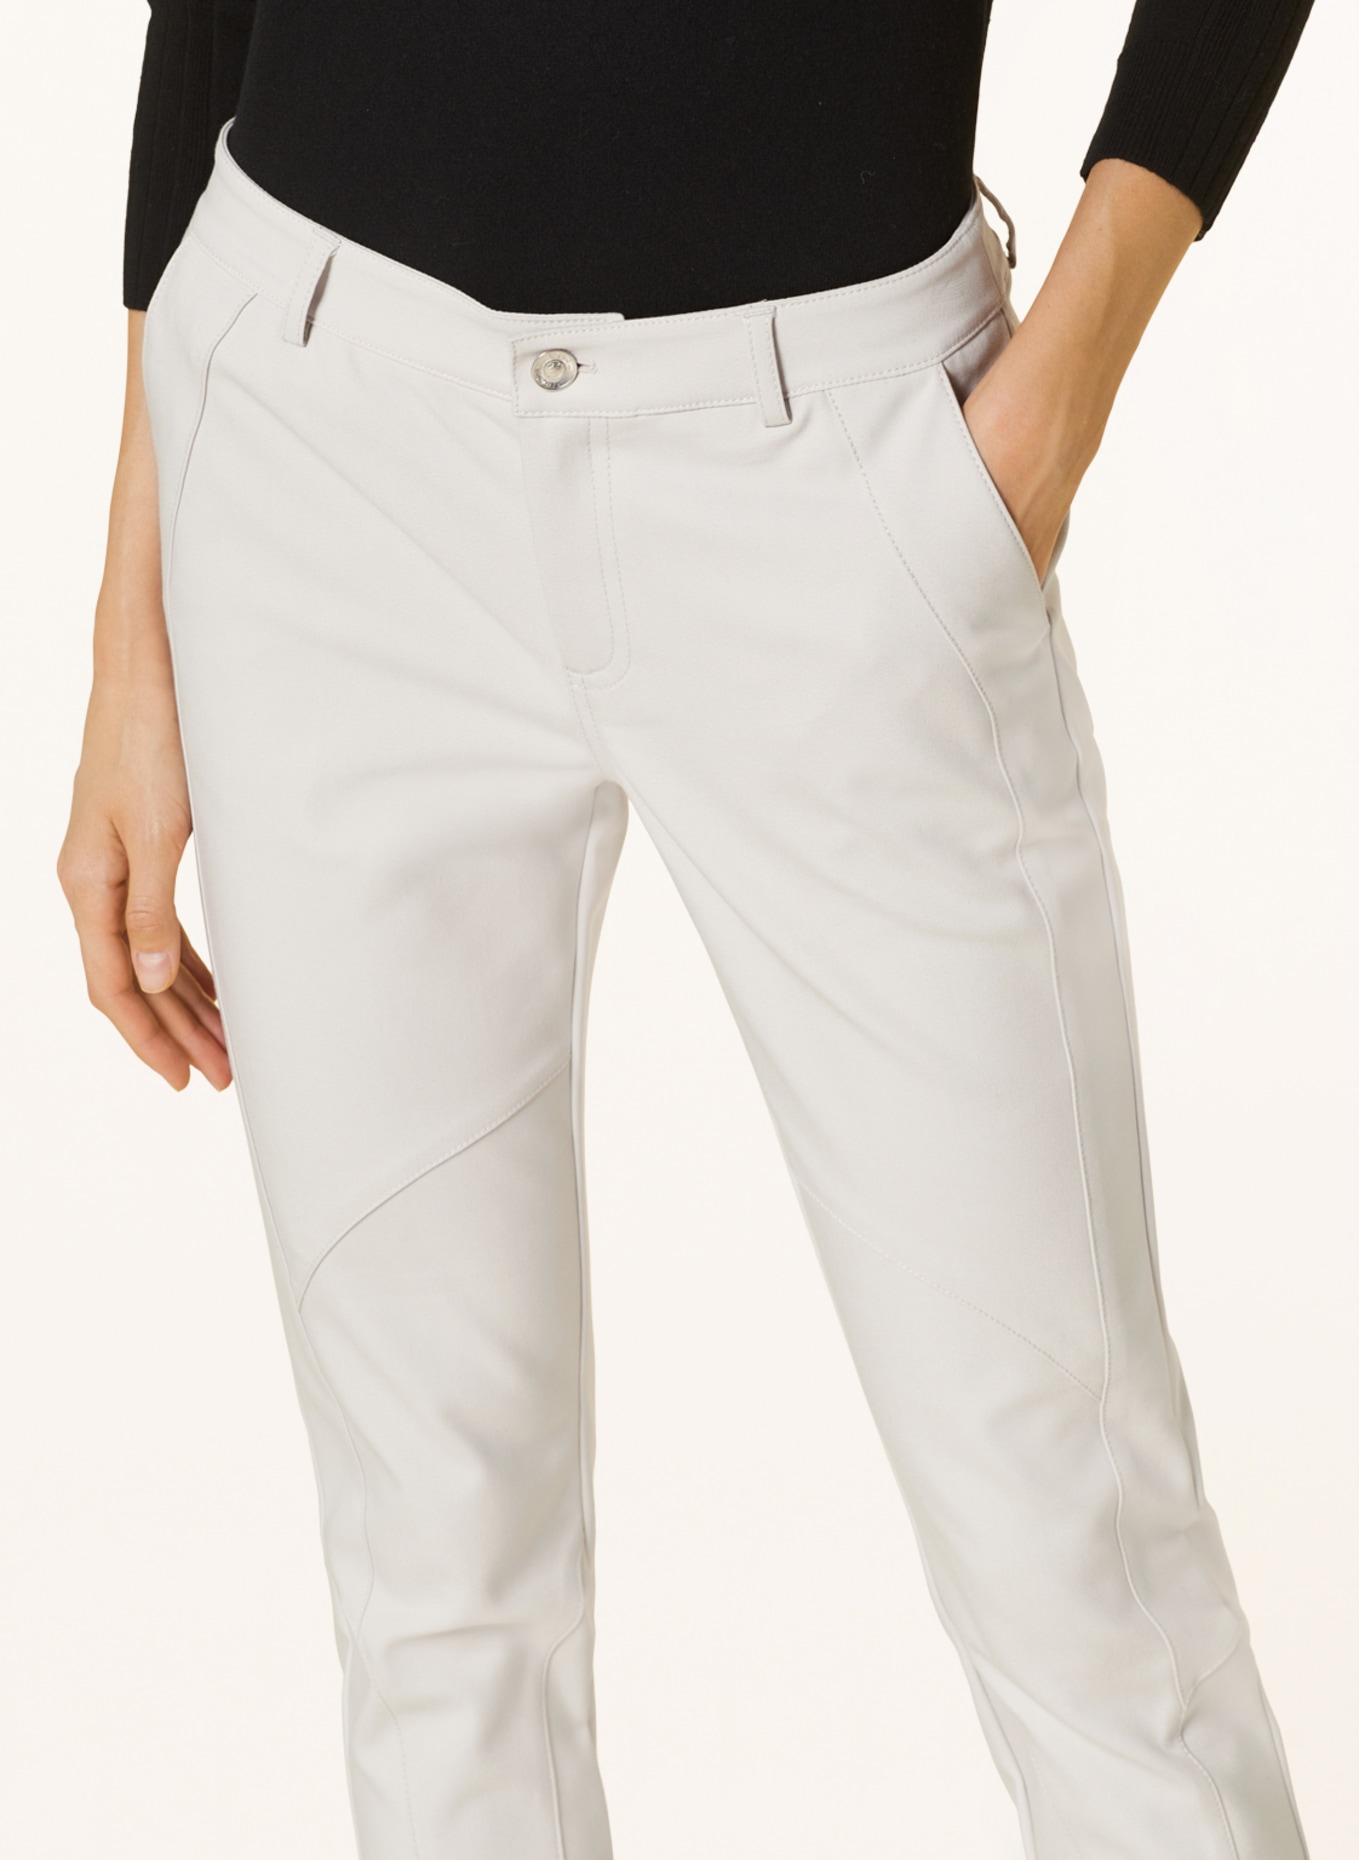 monari 7/8 trousers made of jersey, Color: CREAM (Image 5)